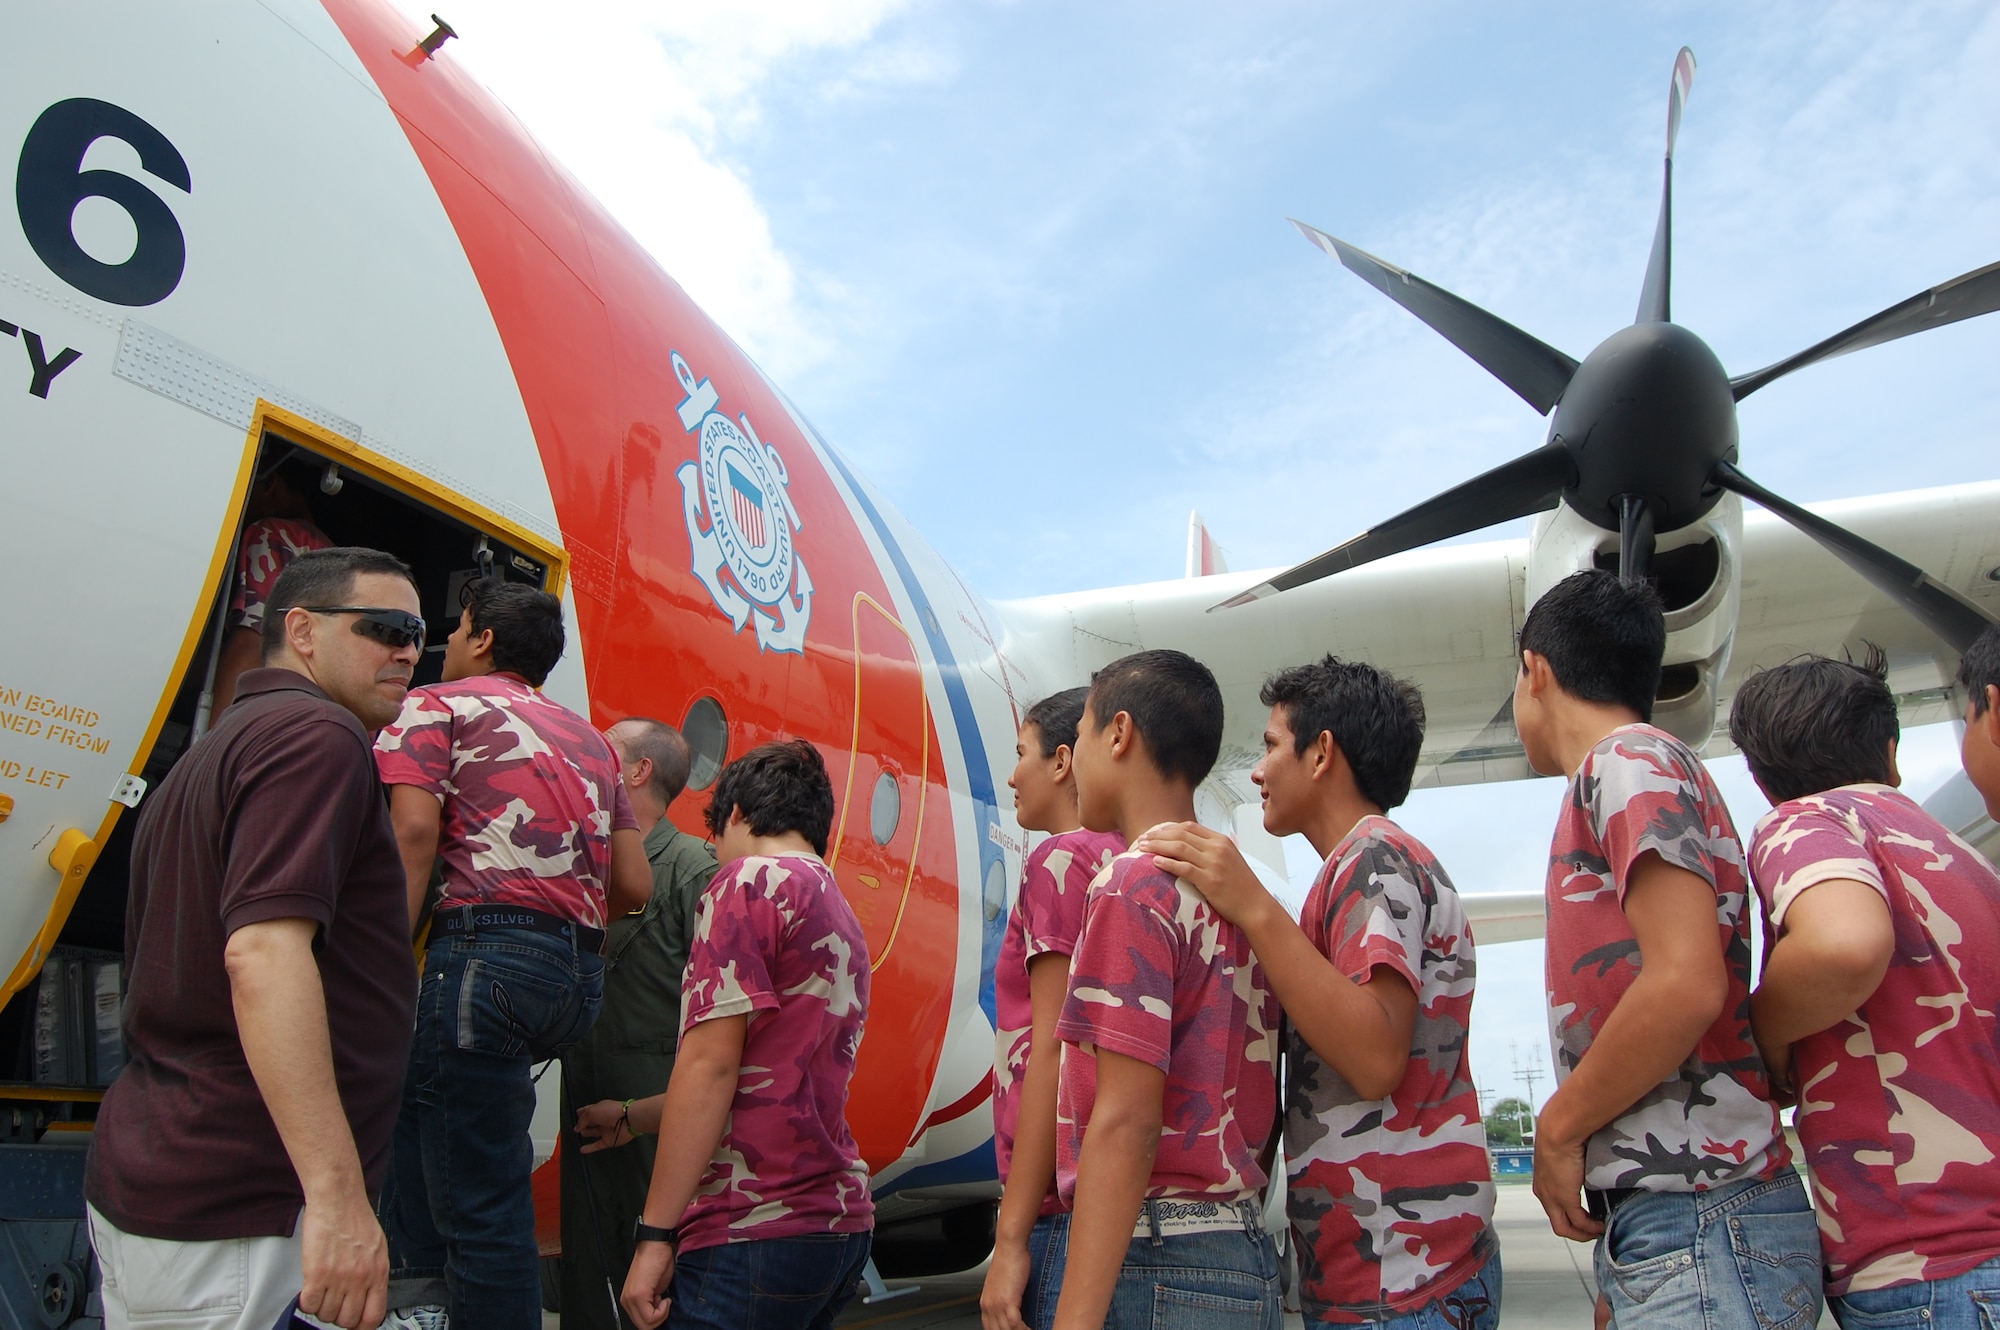 Capt. Gabriel Rios (far left), 478th Expeditionary Operations Squadron chaplain, escorts firefighters and firekids from Colon, Ecuador to a U.S. Coast Guard C-130J static display here Jan. 31.  FOL Manta personnel provided hands-on medical and fire response training to a group of 40 firefighters and firekids from Colon, Ecuador. The Coast Guard aircraft is deployed to FOL Manta in support of counterdrug operations in the eastern Pacific. (U.S. Air Force photo by 1st Lt. Beth Woodward)